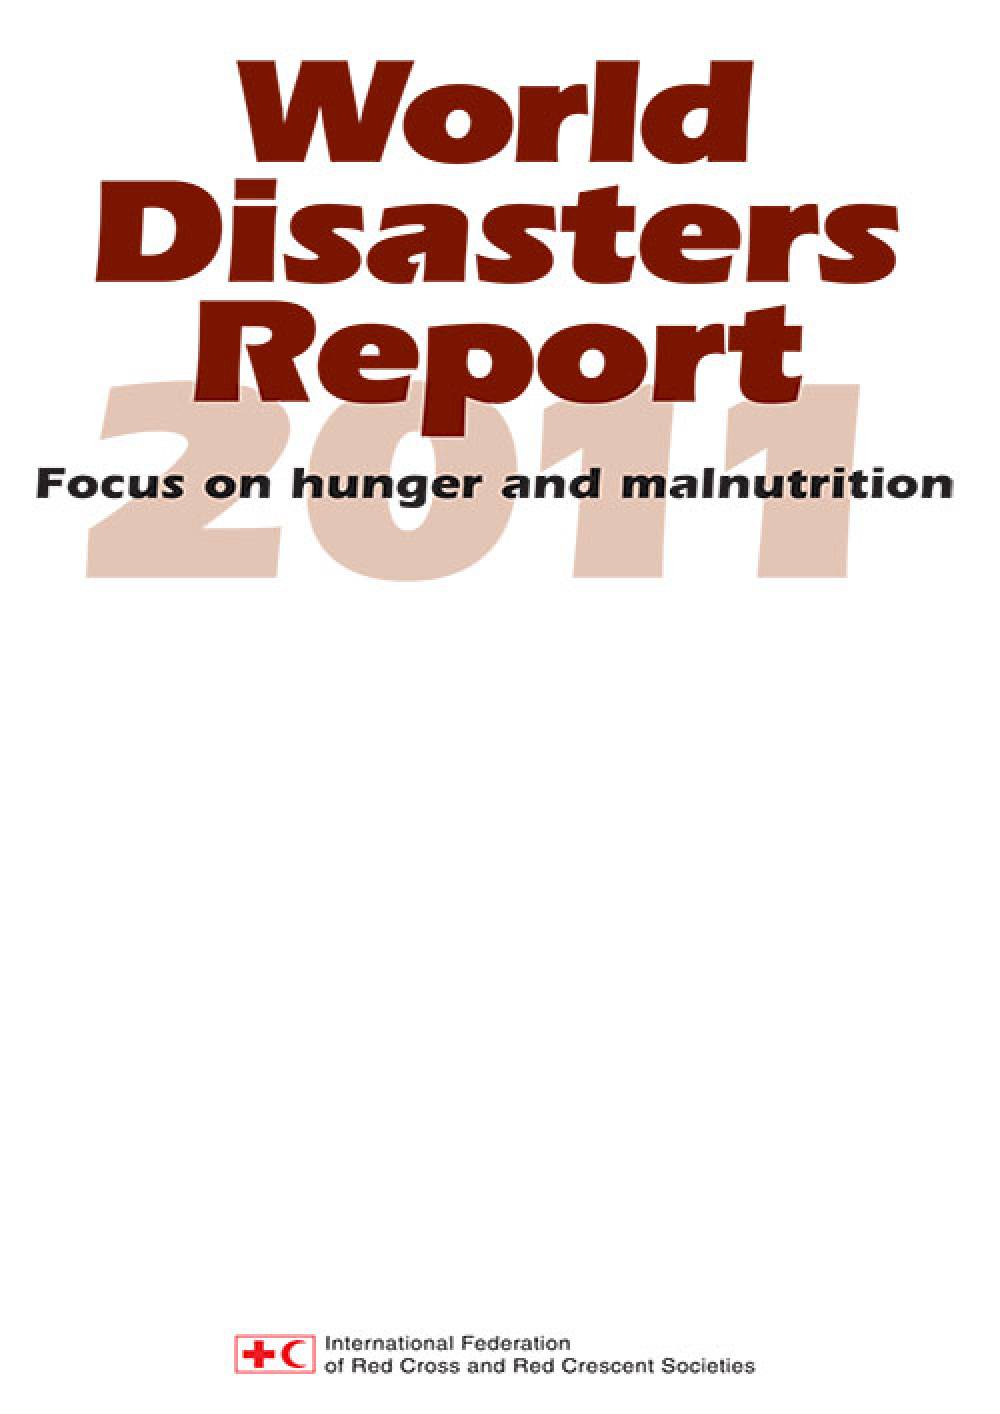 World Disaster Report 2011